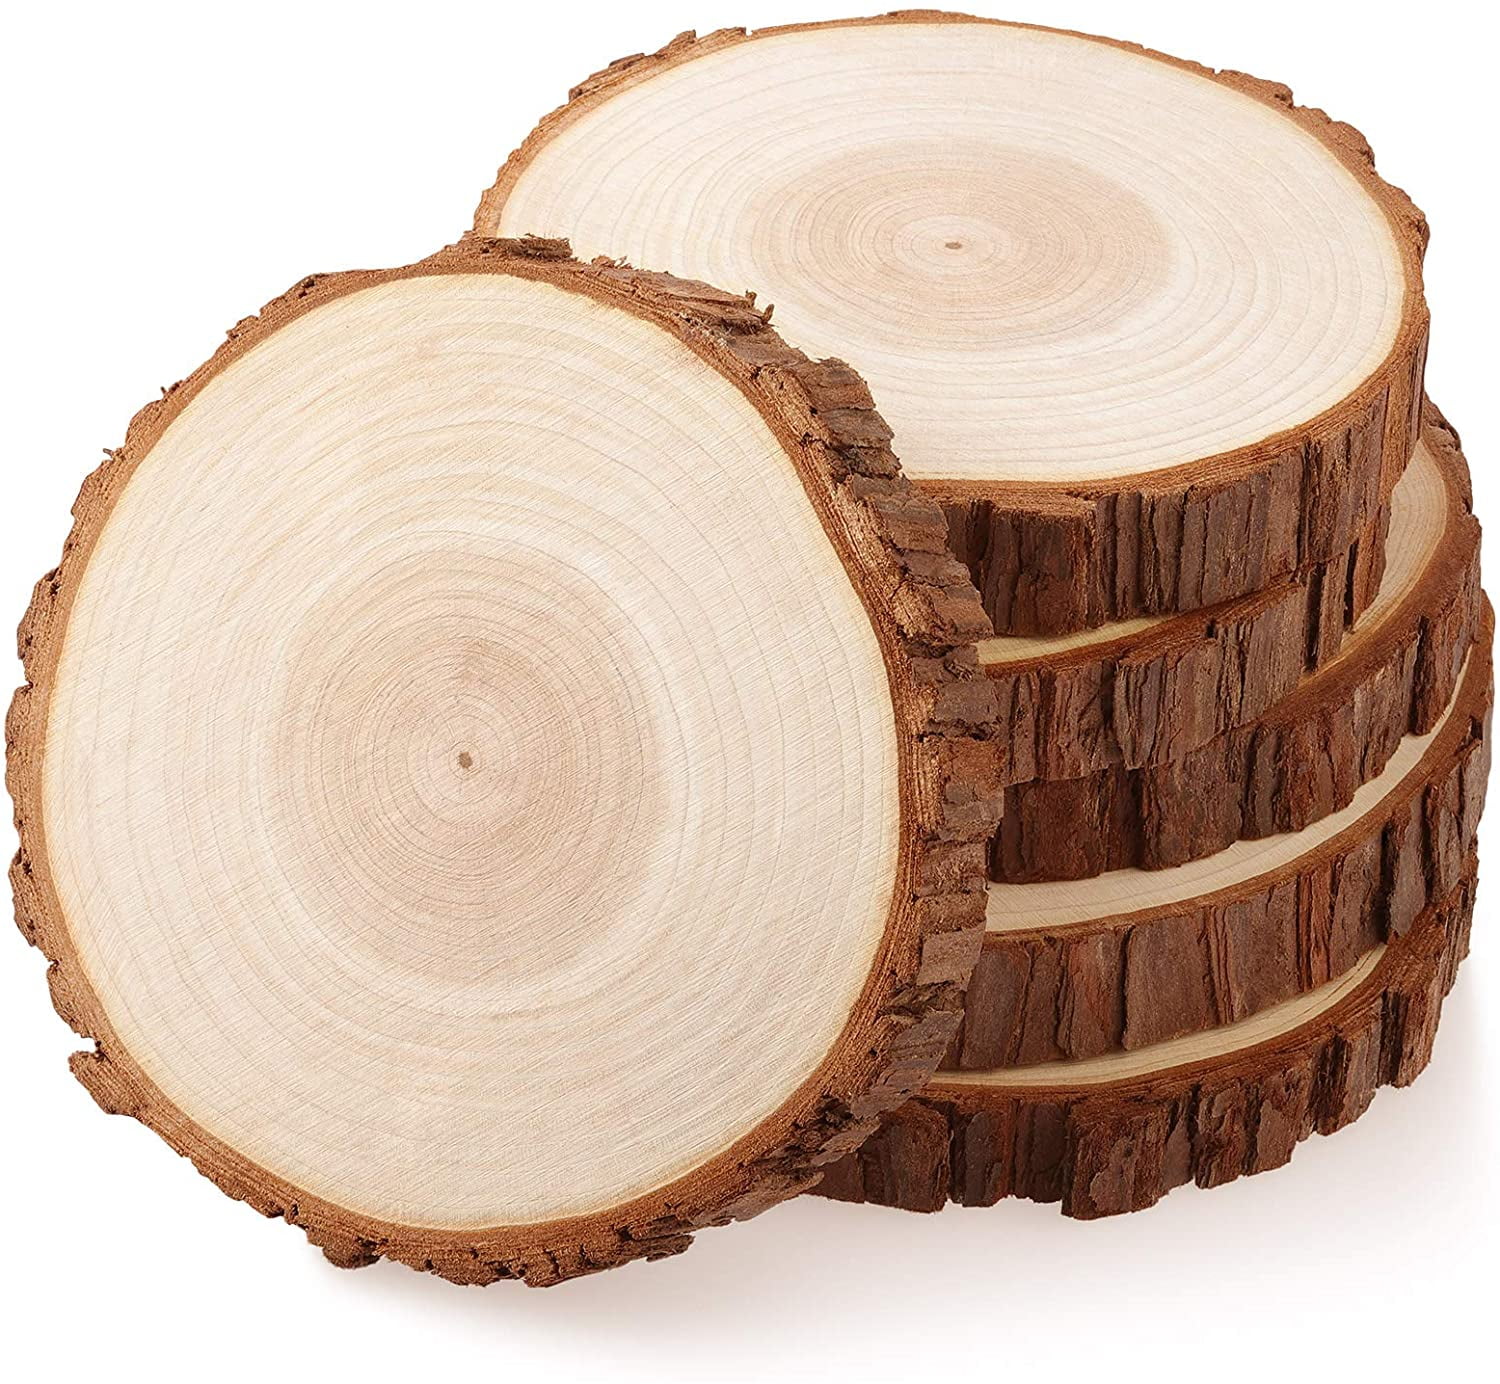 Fuyit Wood Slices 6 Pcs 6-6.3 Inches Unfinished Natural Tree Slice Wooden Circle with Bark Log Discs for DIY Arts and Craft Rustic Wedding Christmas